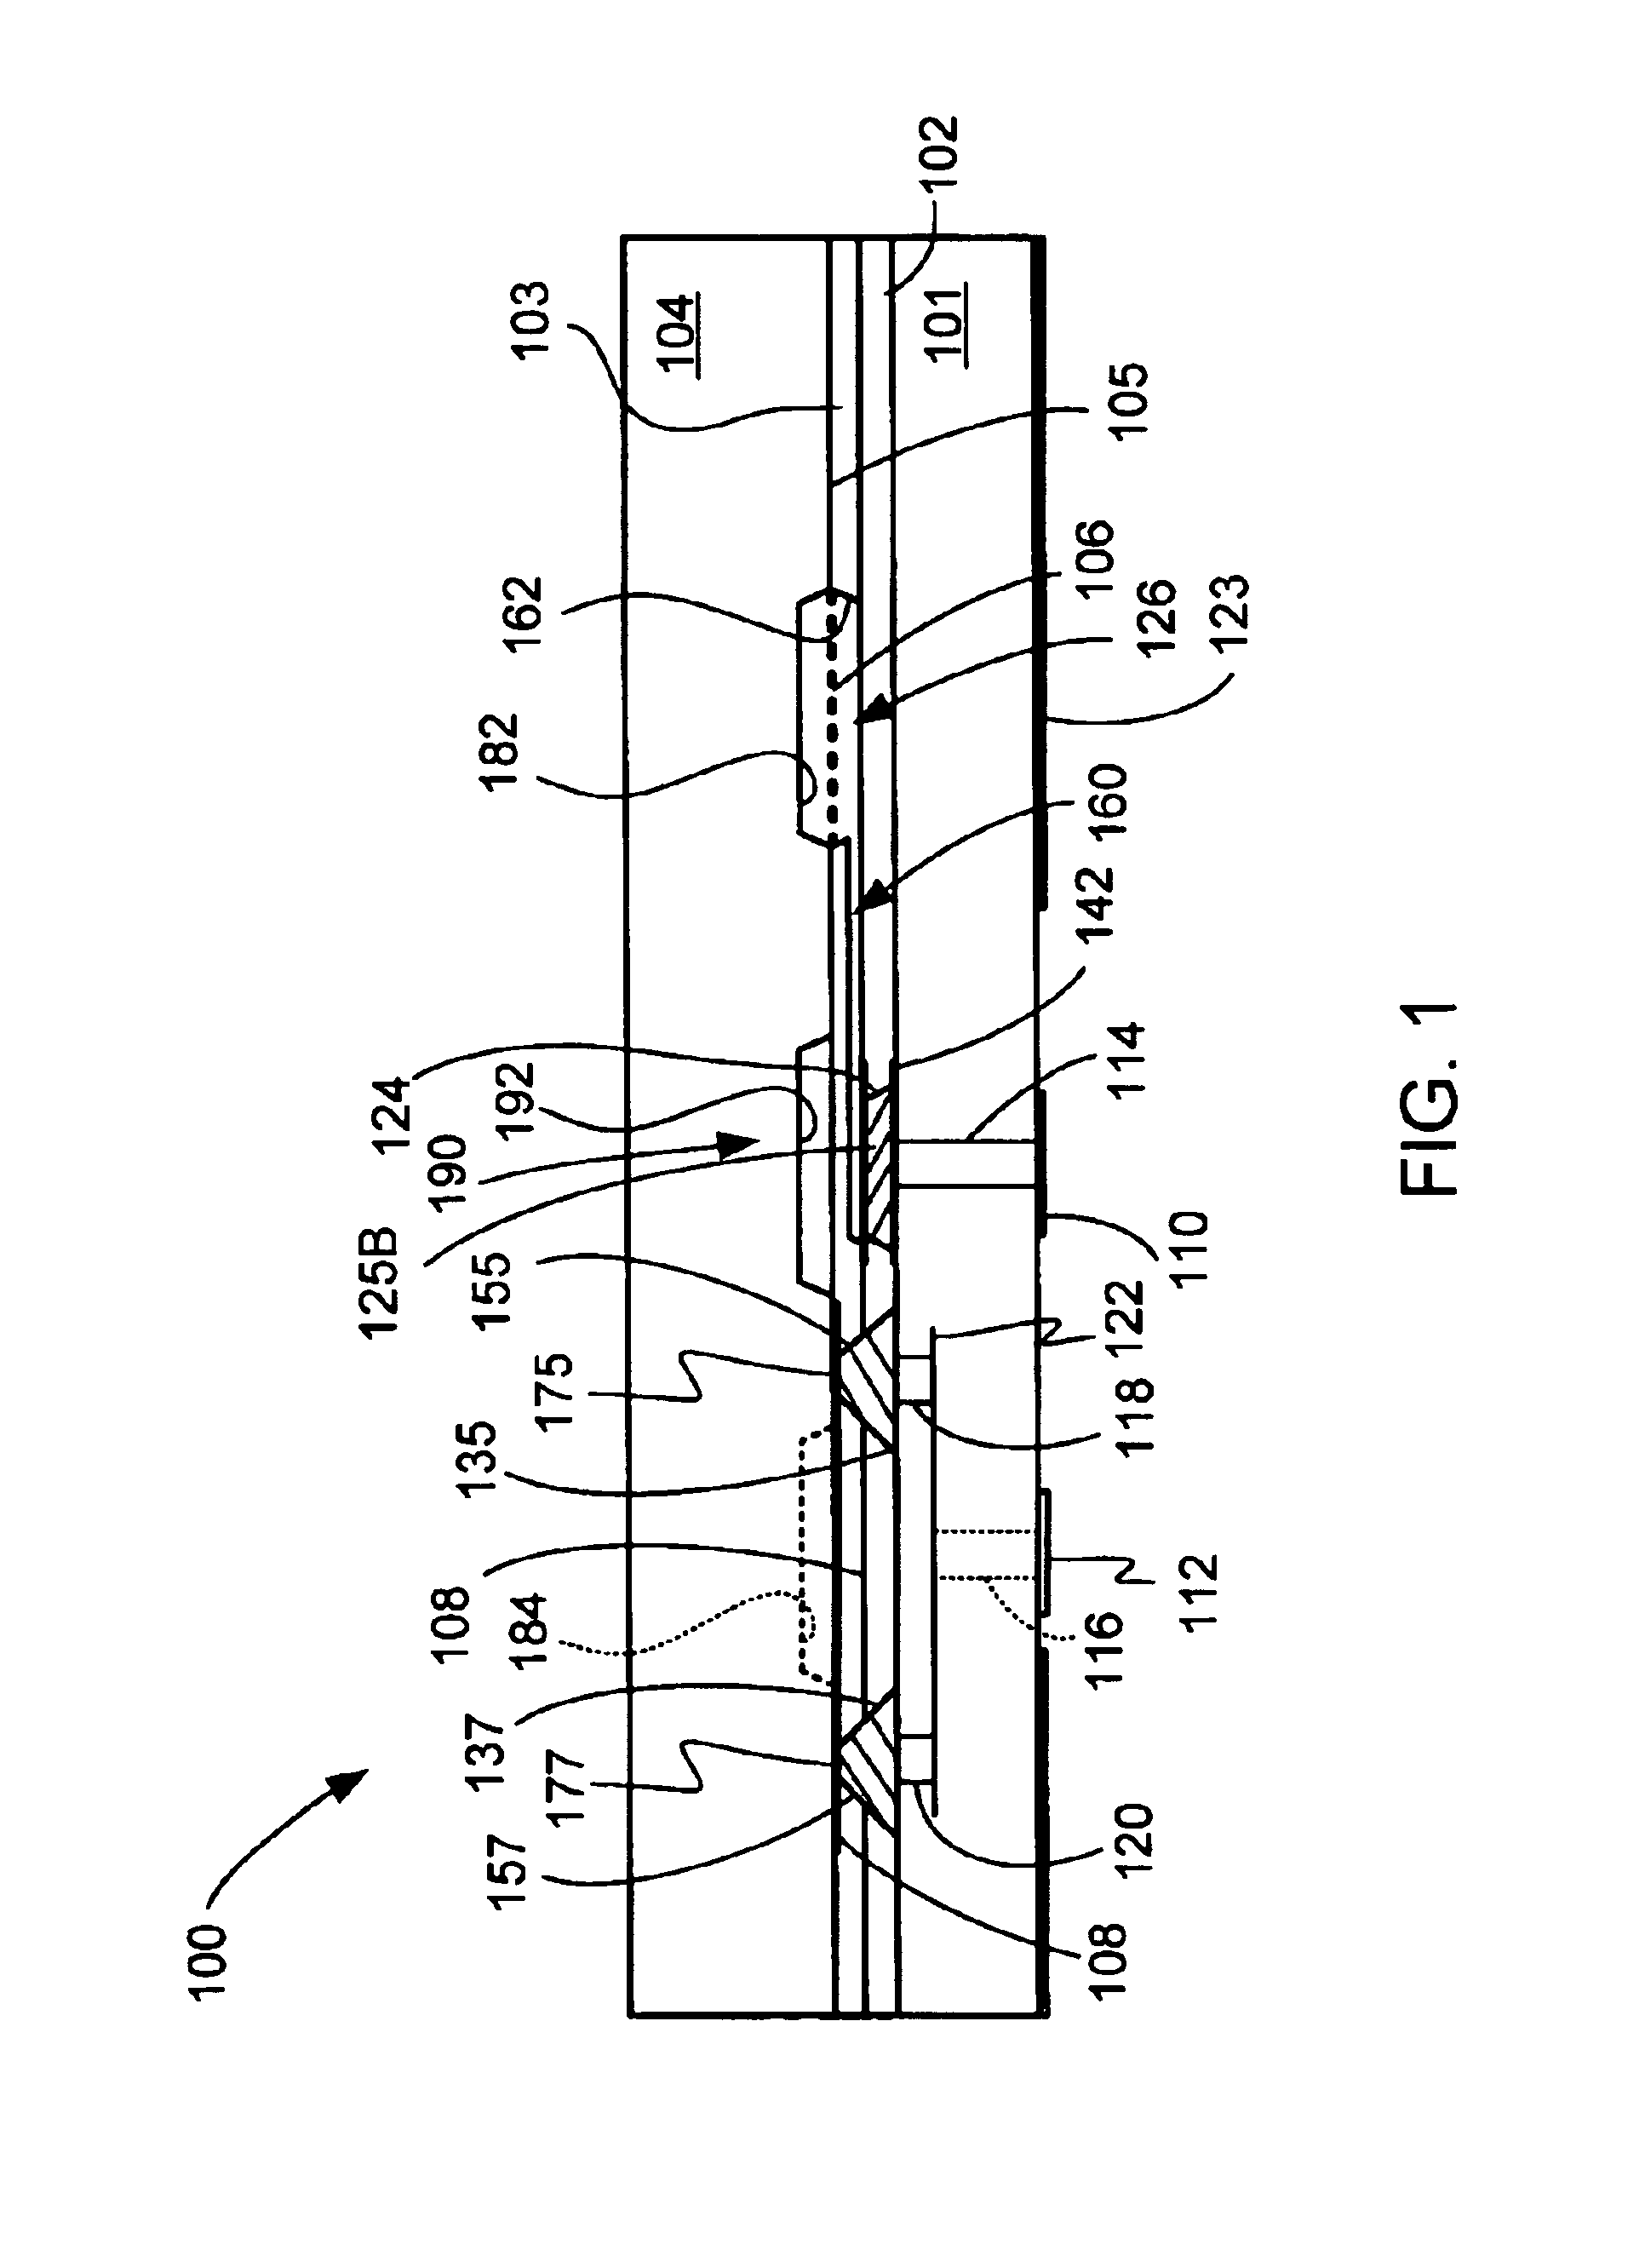 Multi-substrate liquid metal high-frequency switching device